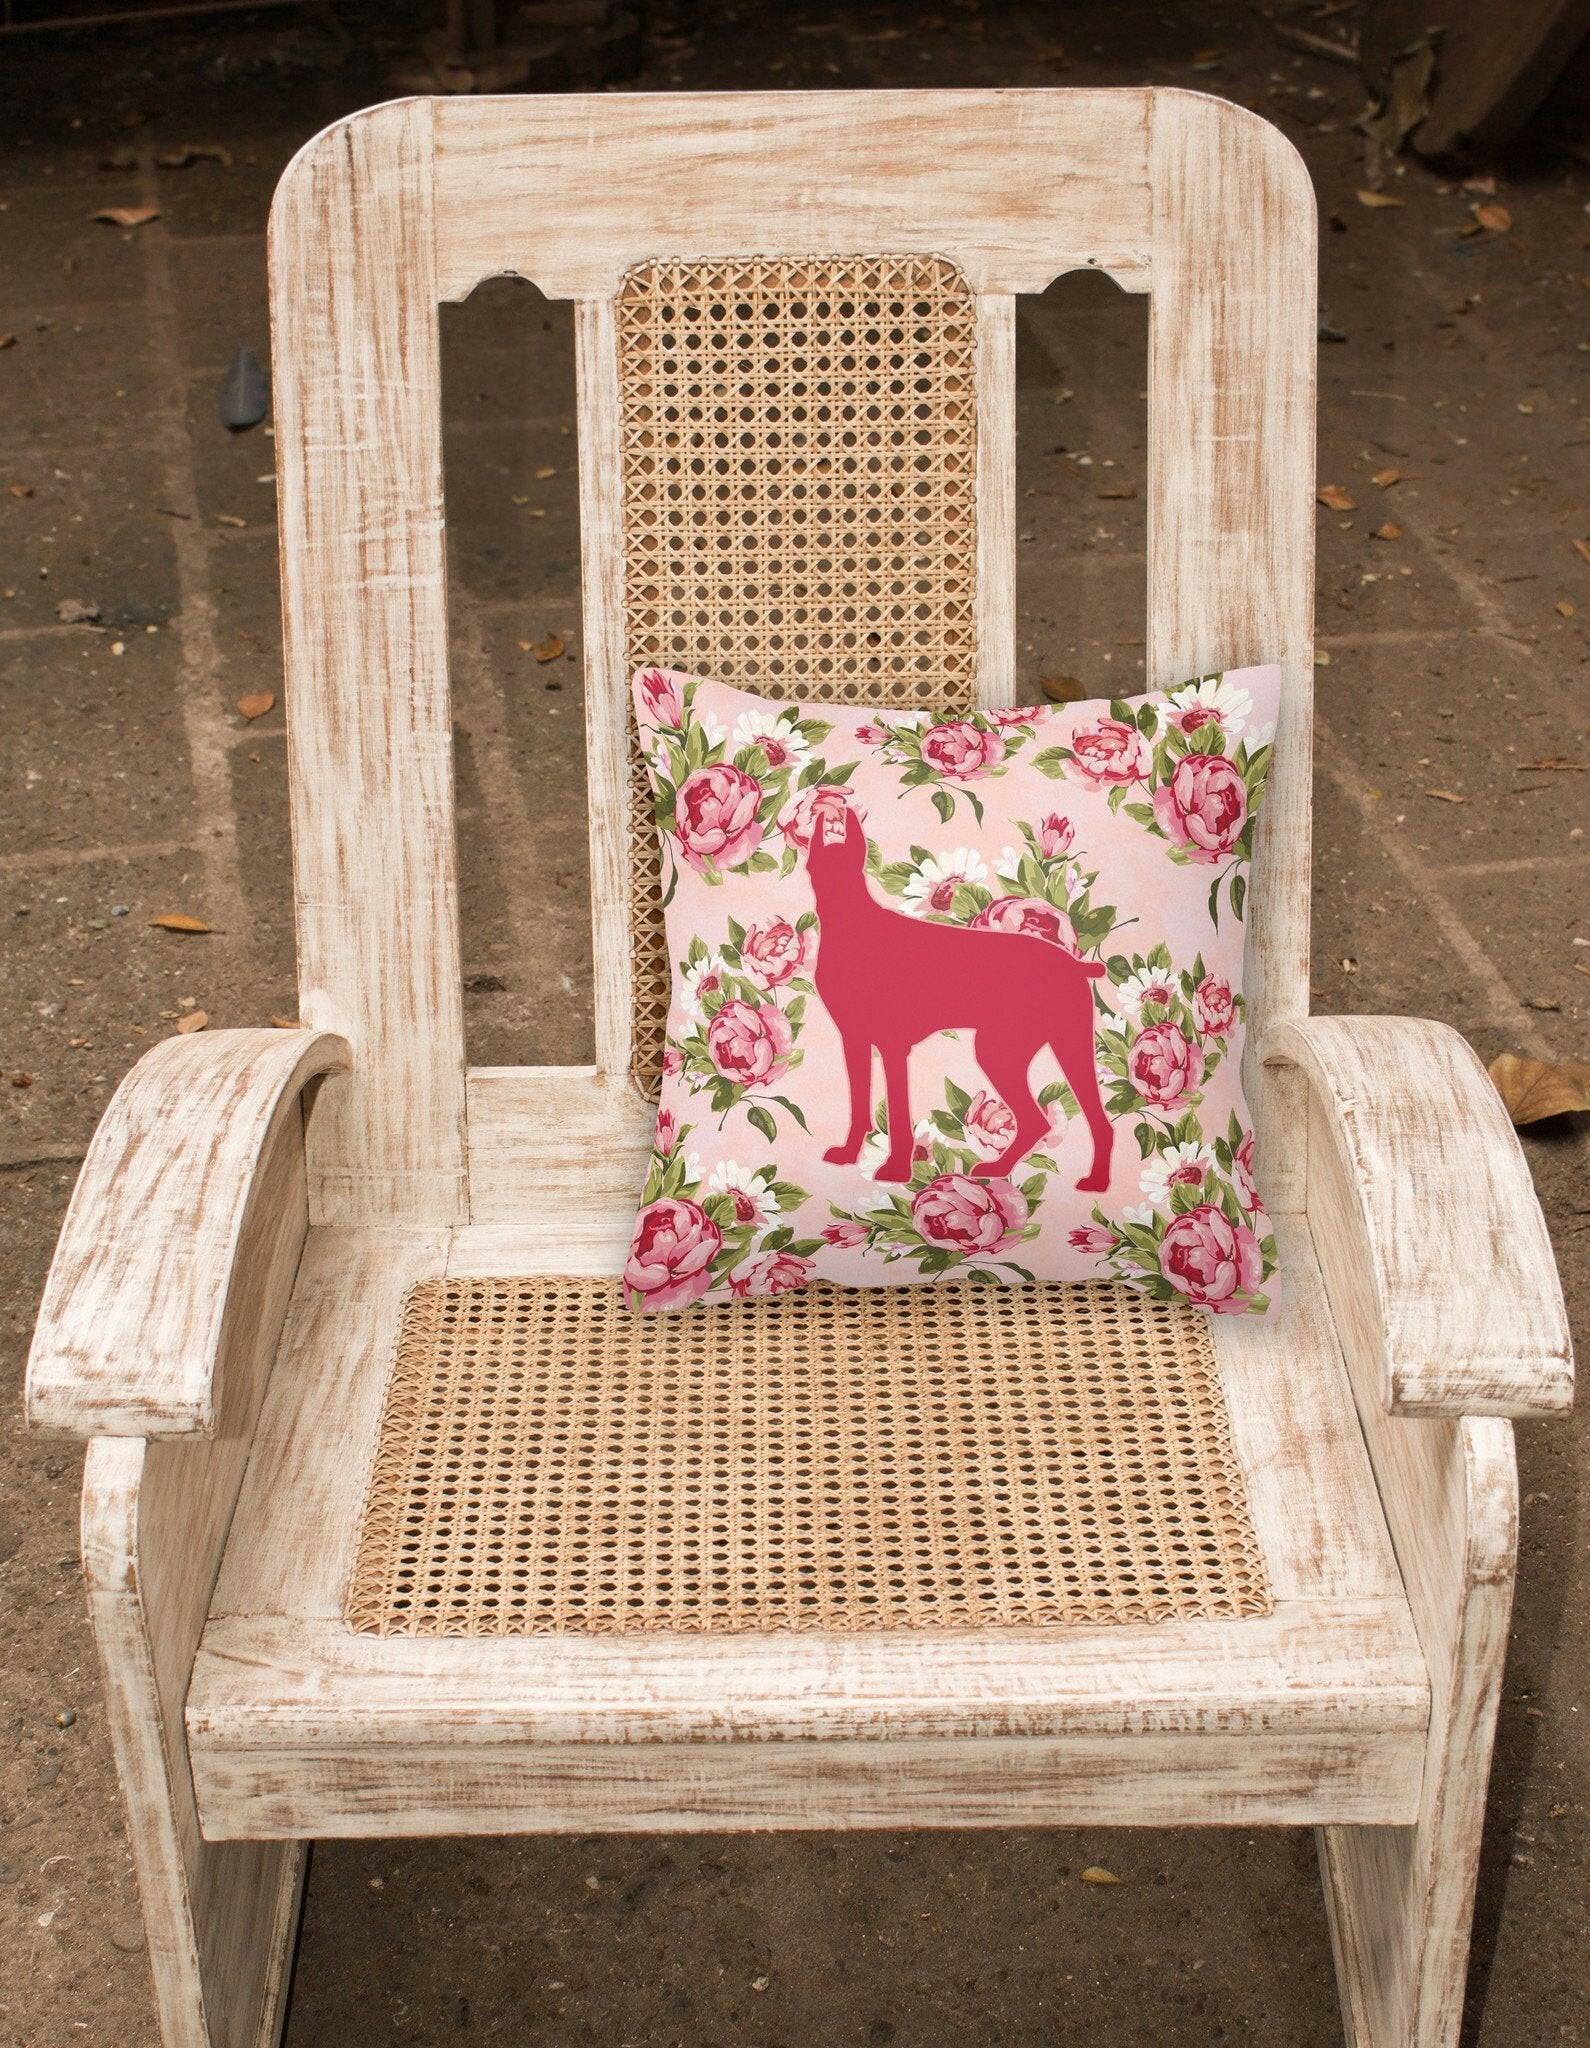 Great Dane Shabby Chic Pink Roses  Fabric Decorative Pillow BB1081-RS-PK-PW1414 - the-store.com